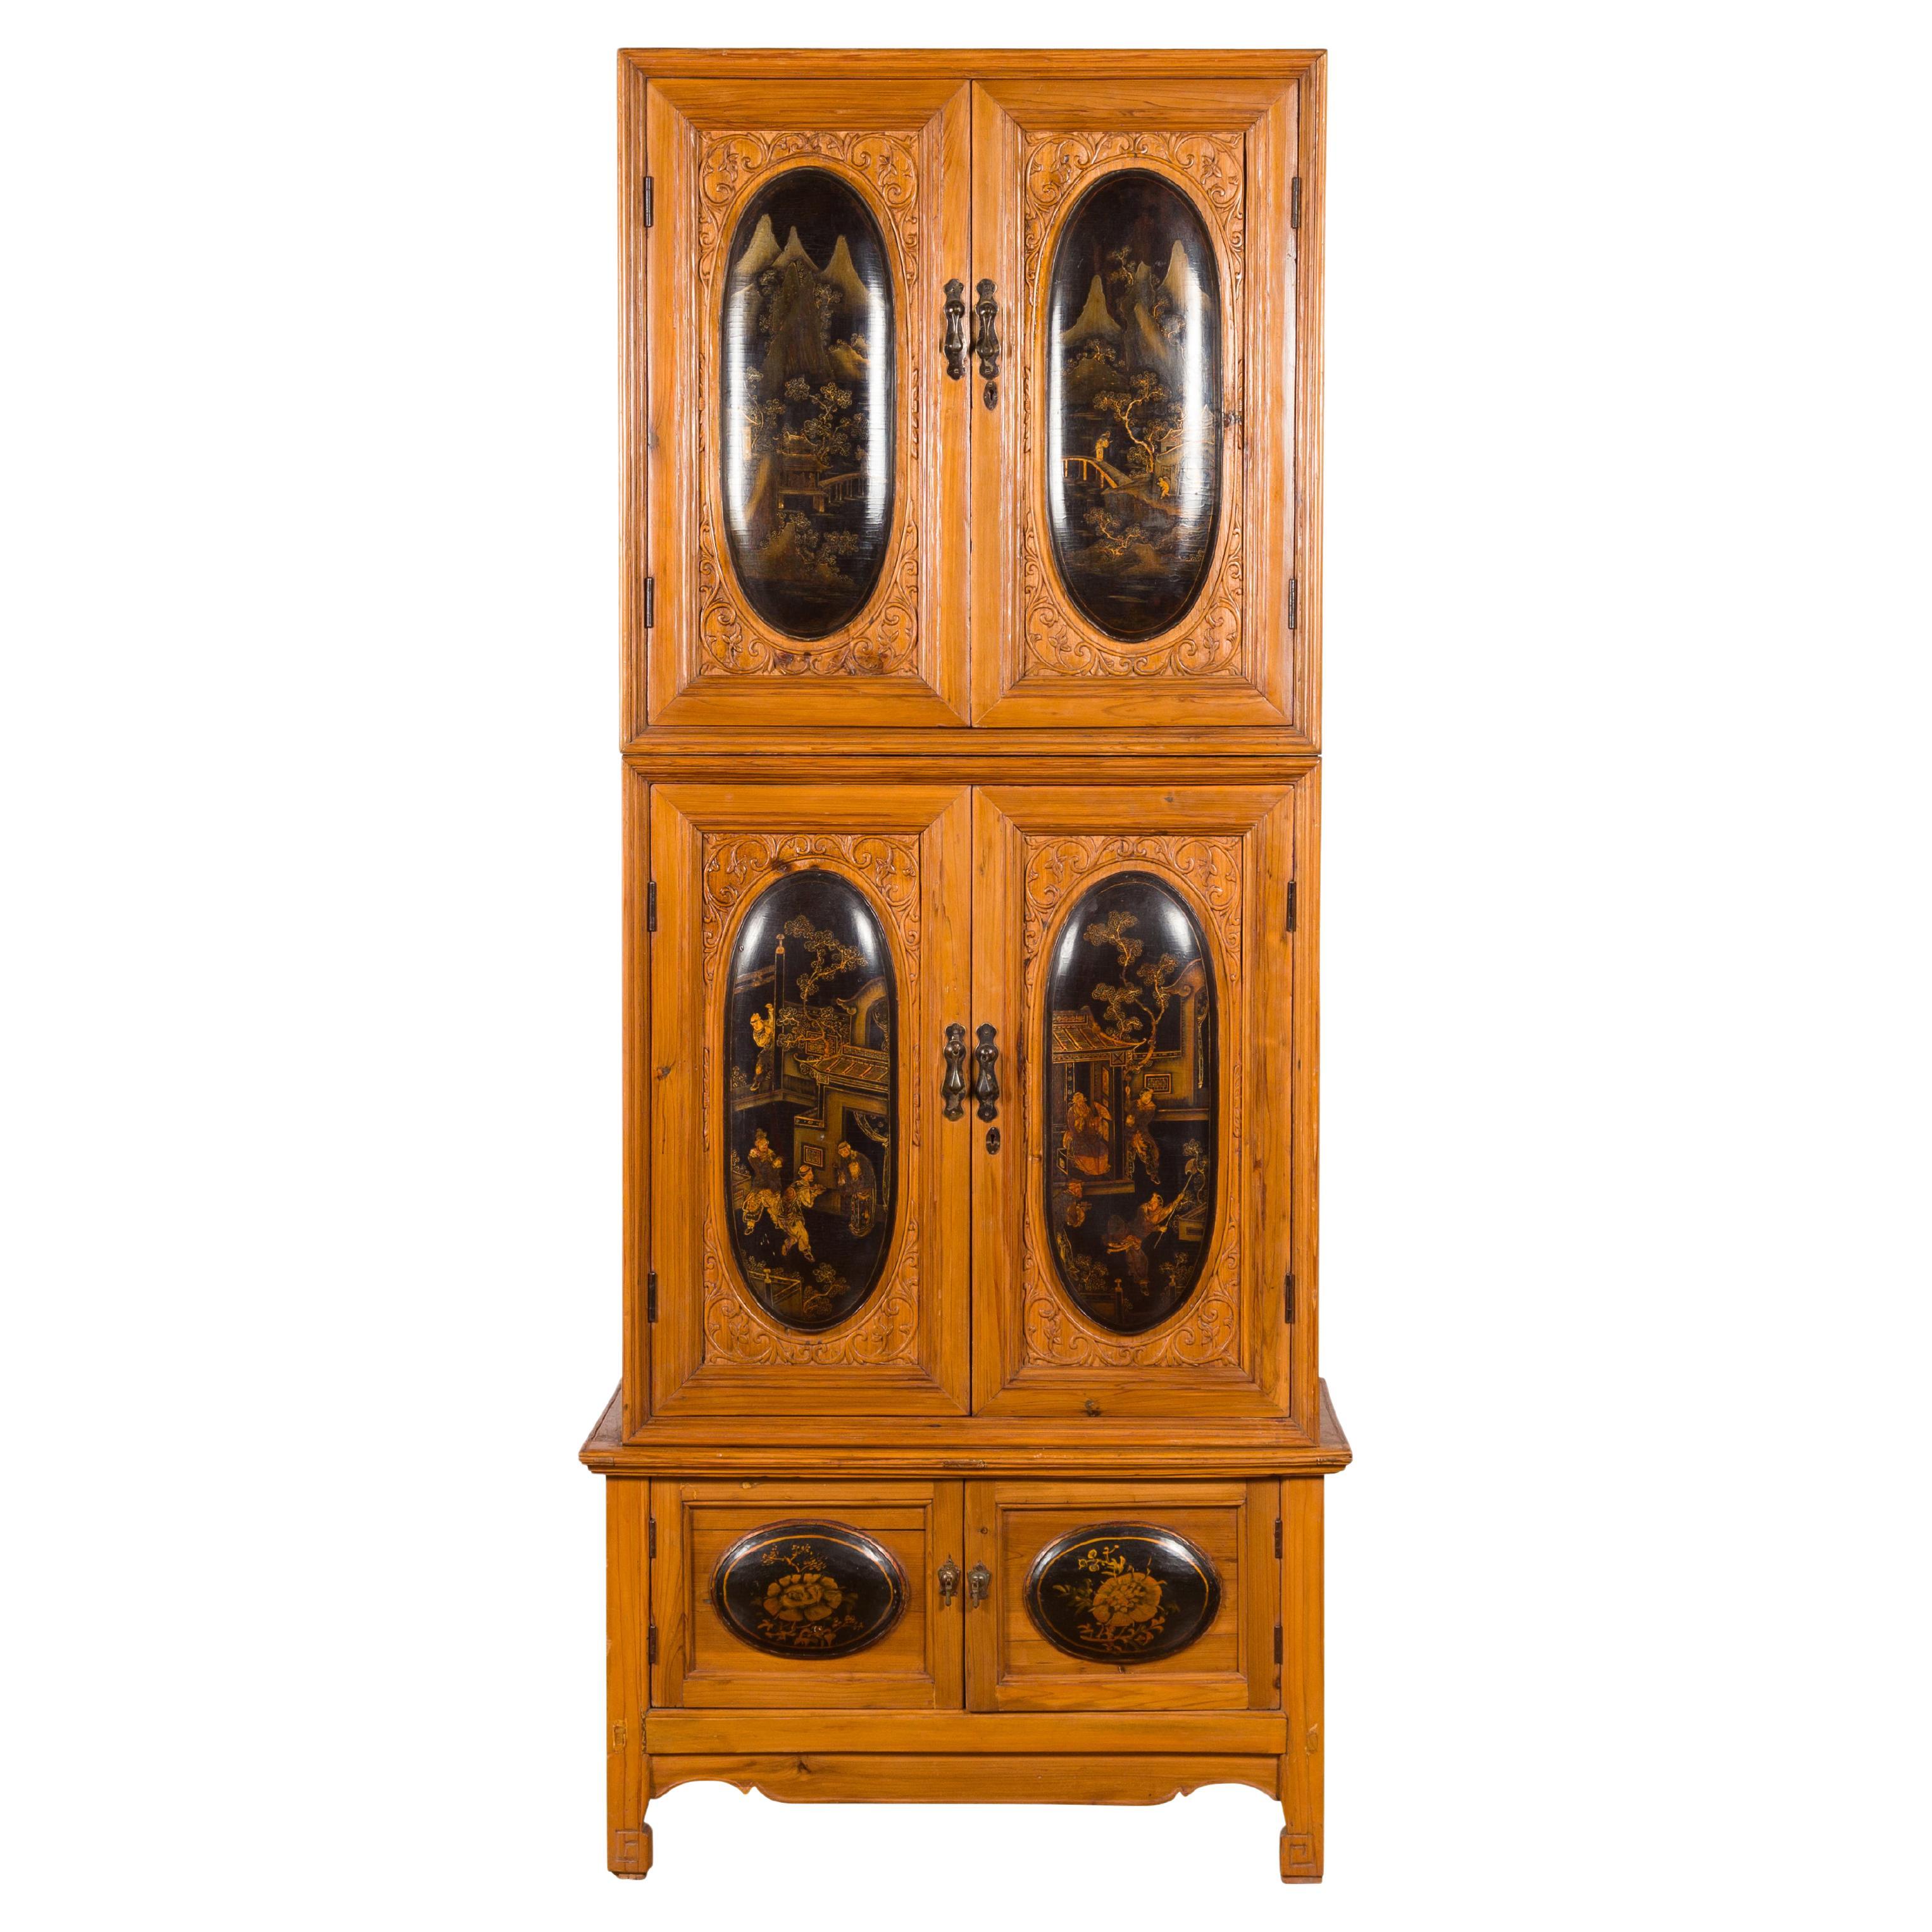 Tall Chinese 19th Century Qing Dynasty Wooden Cabinet with Chinoiserie Panels For Sale